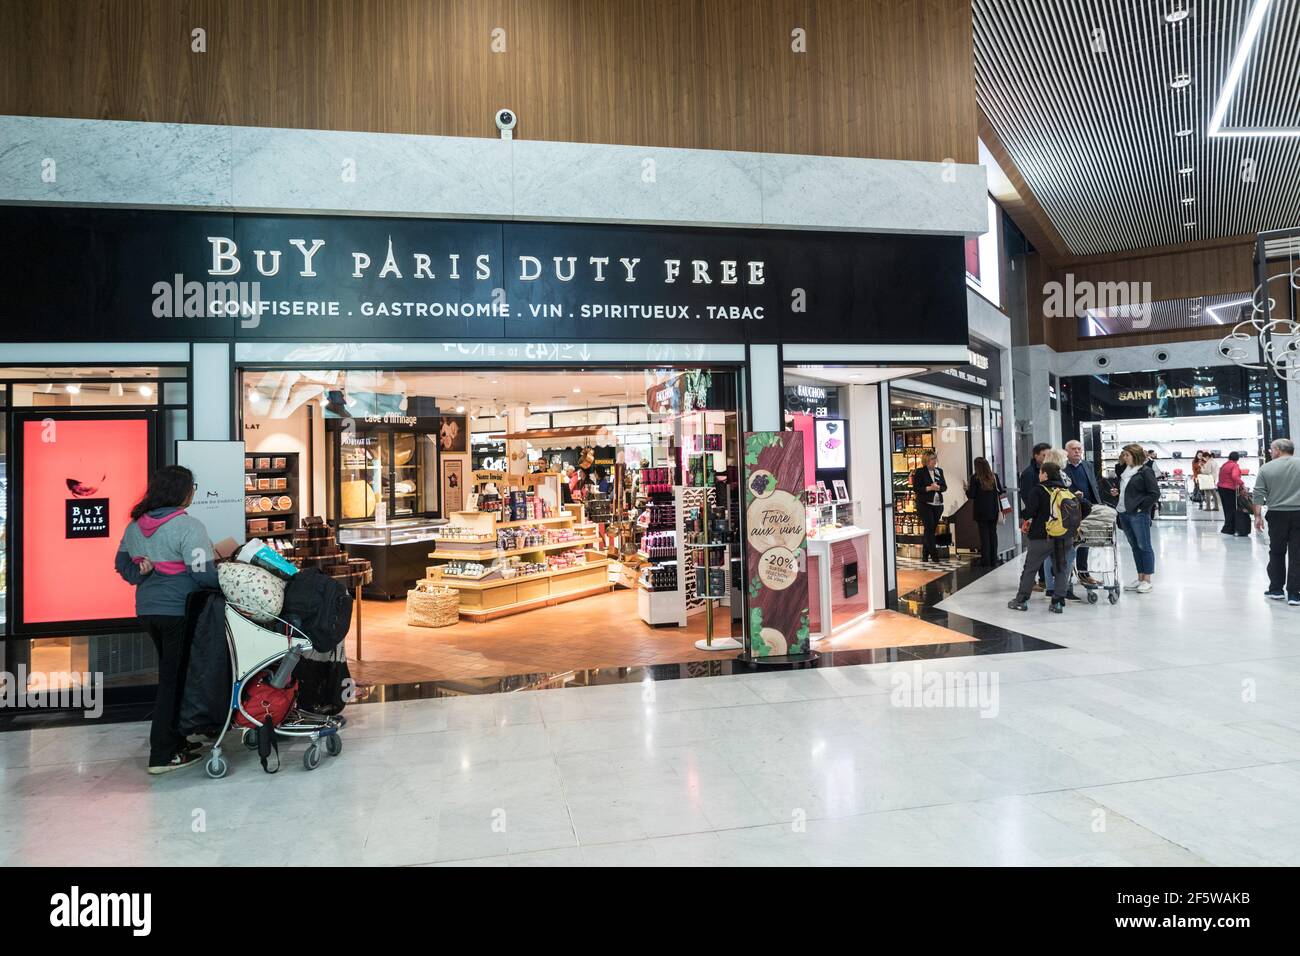 Duty free shopping, Charles de Gaulle airport, Paris, France Stock Photo -  Alamy